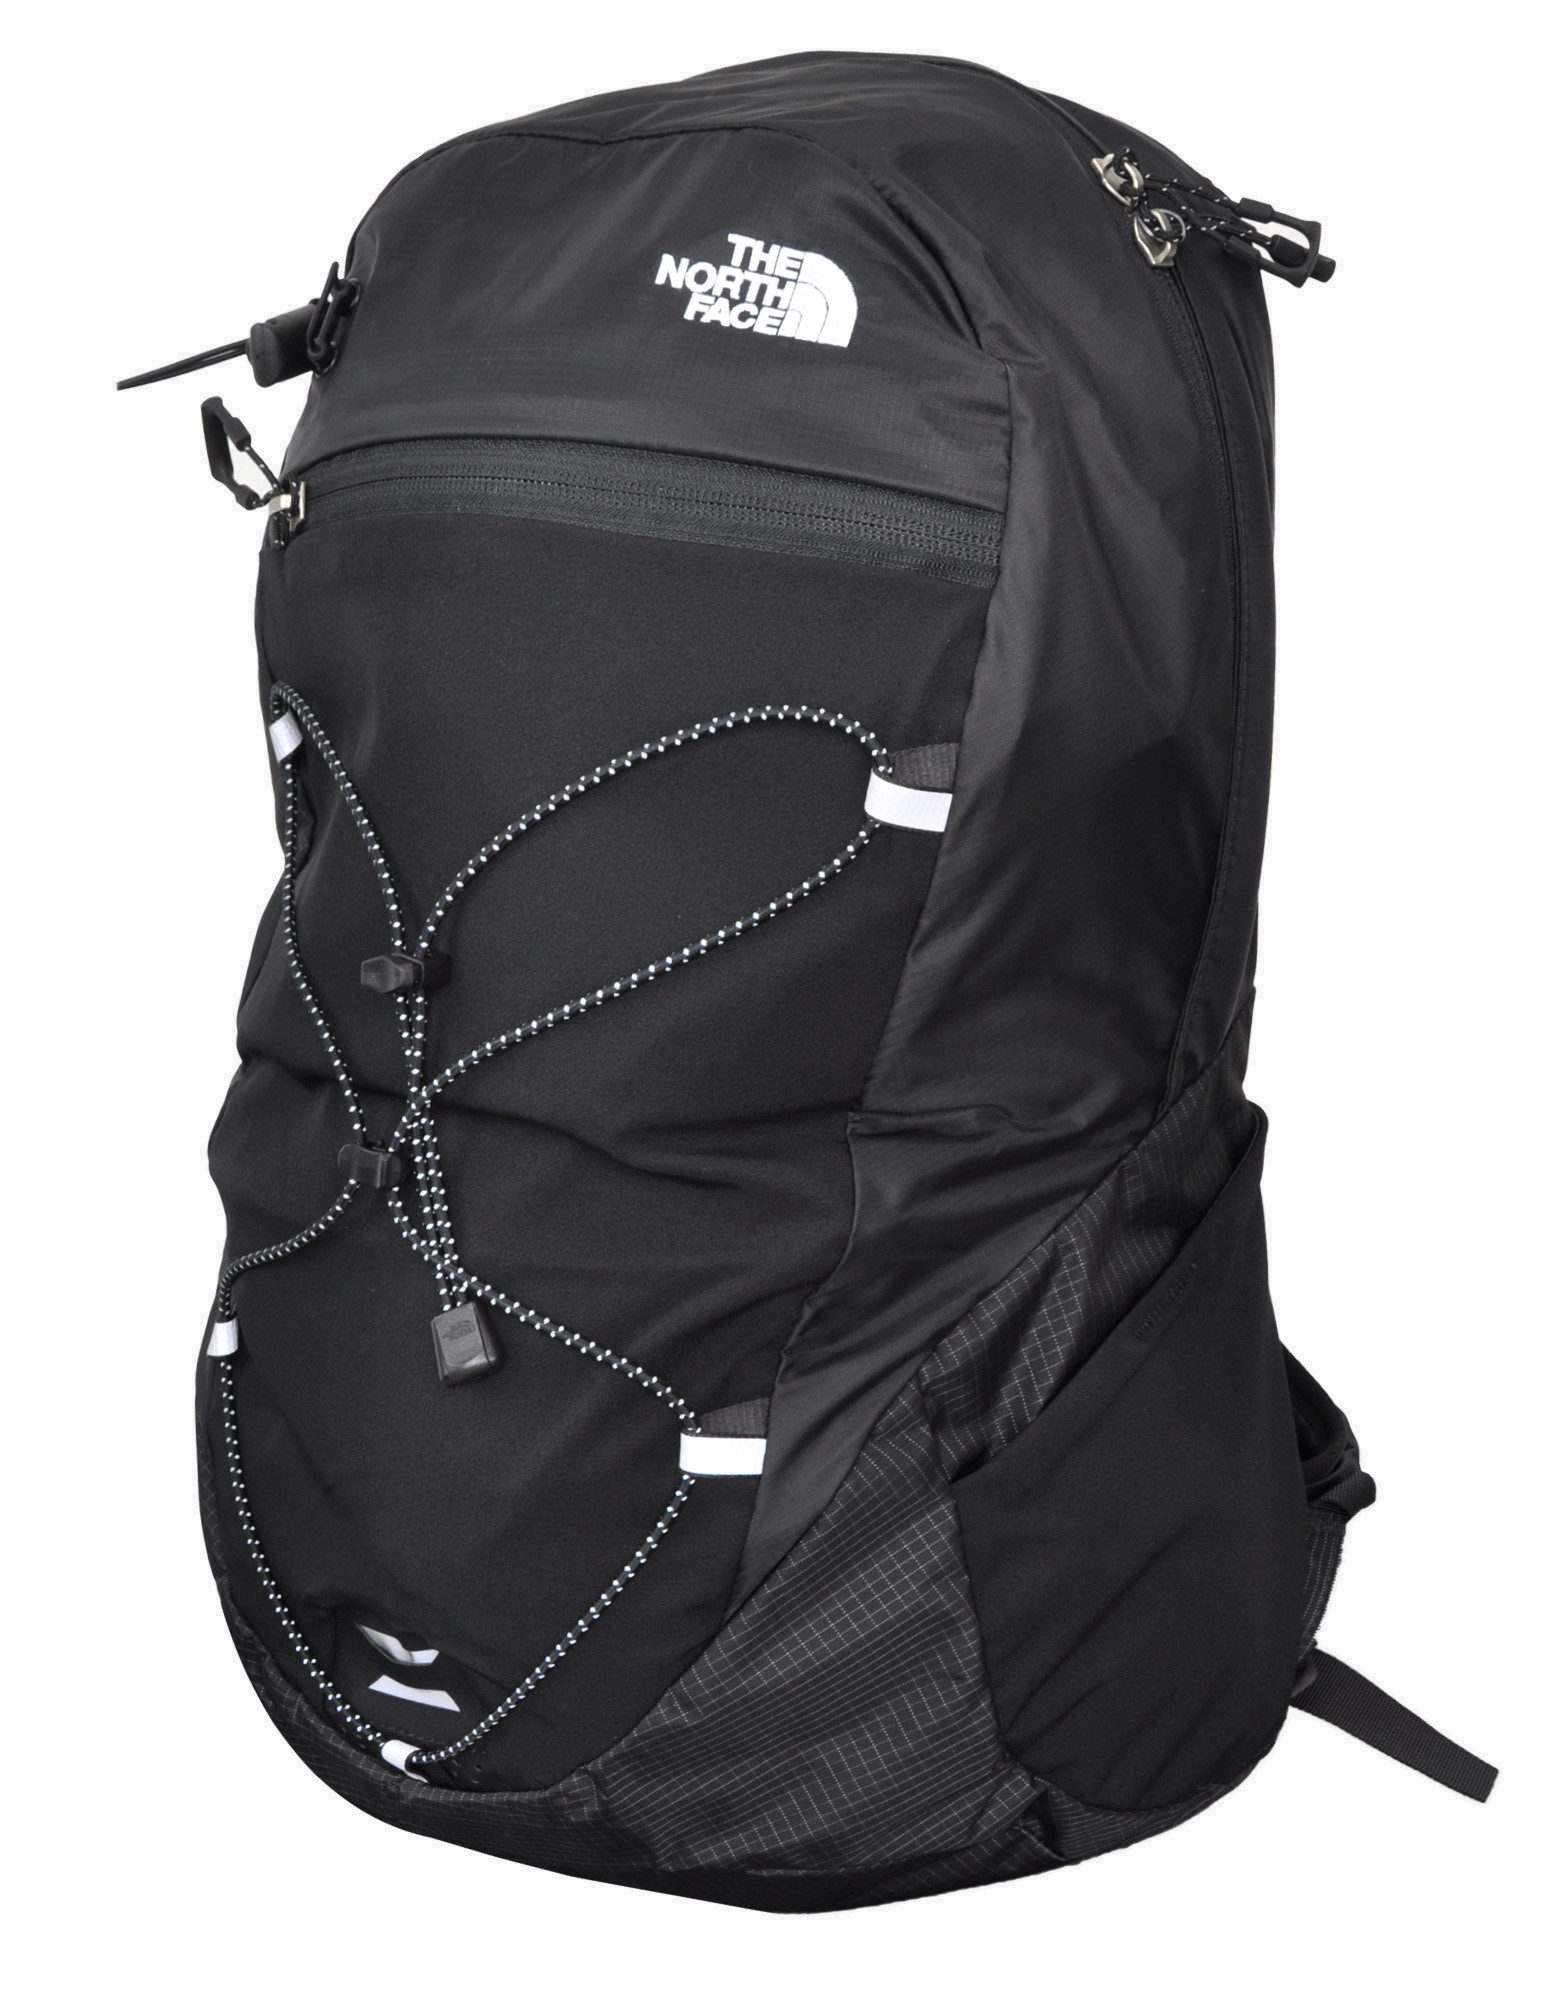 the north face 20l backpack